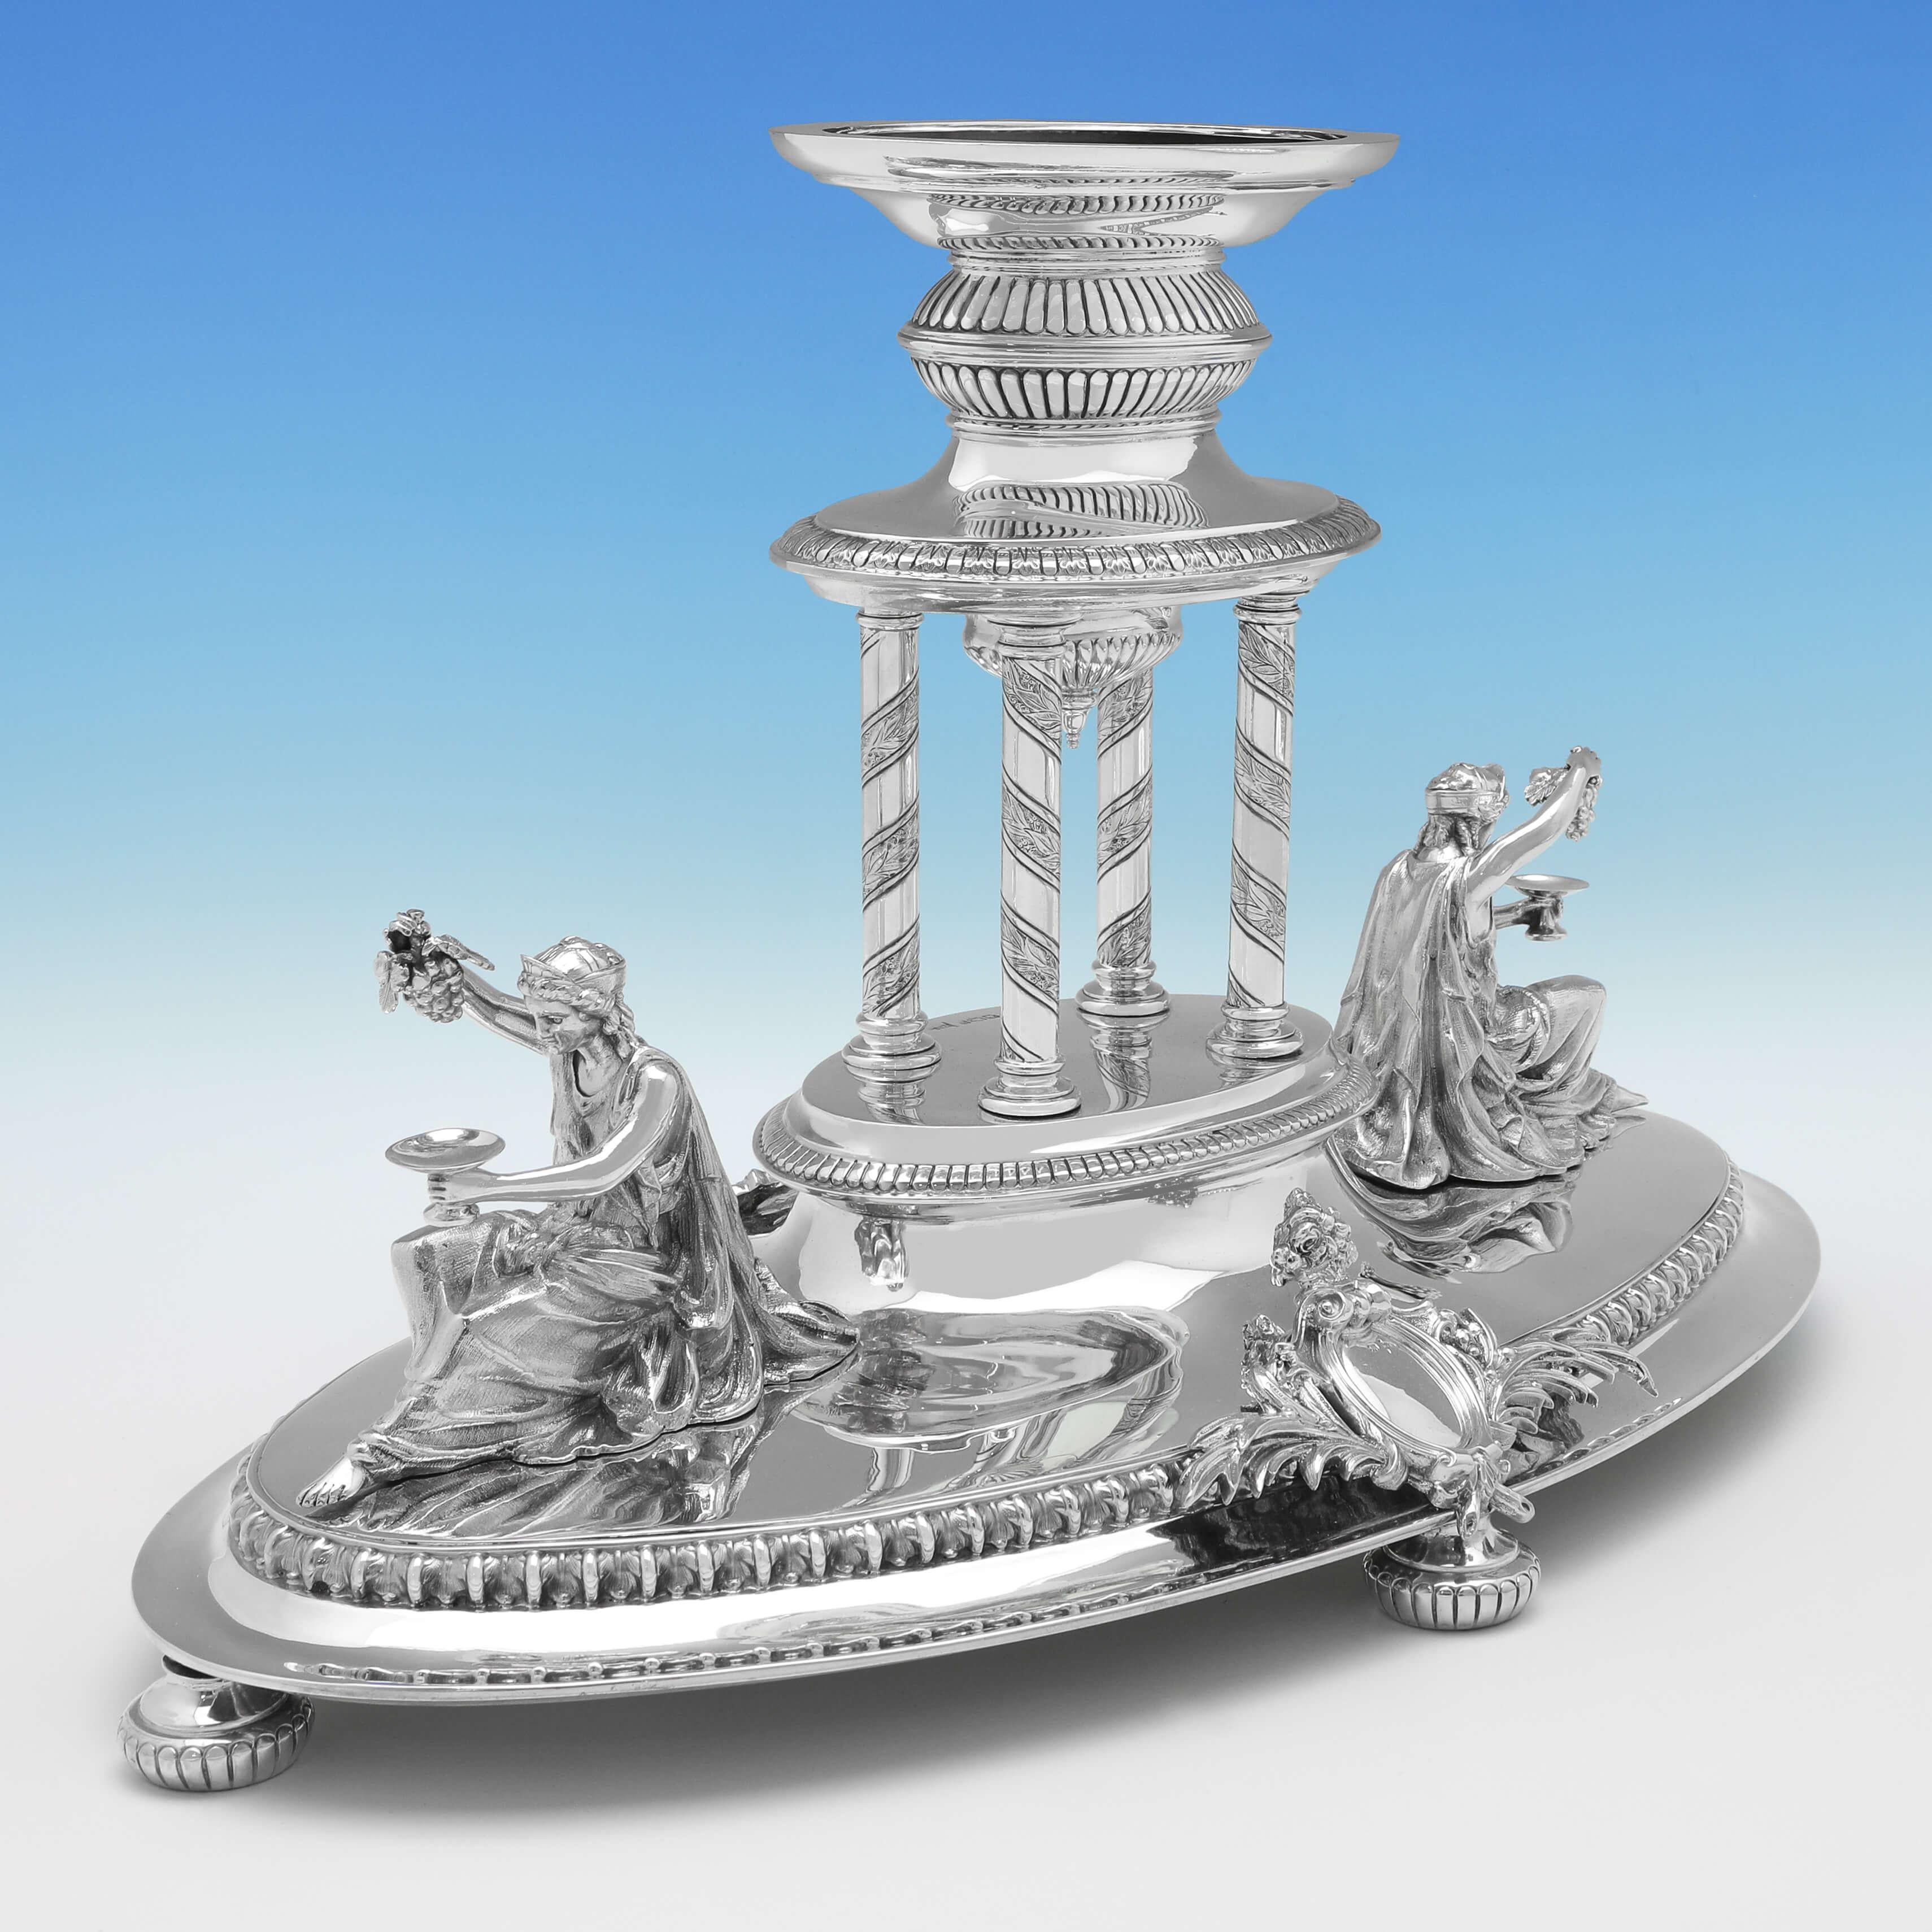 Hallmarked in Sheffield in 1897 by Walker & Hall, this exceptional, Victorian, antique sterling silver centrepiece, features a removable central bowl supported by four neoclassical columns, surmounted on an oval base adorned to both ends with